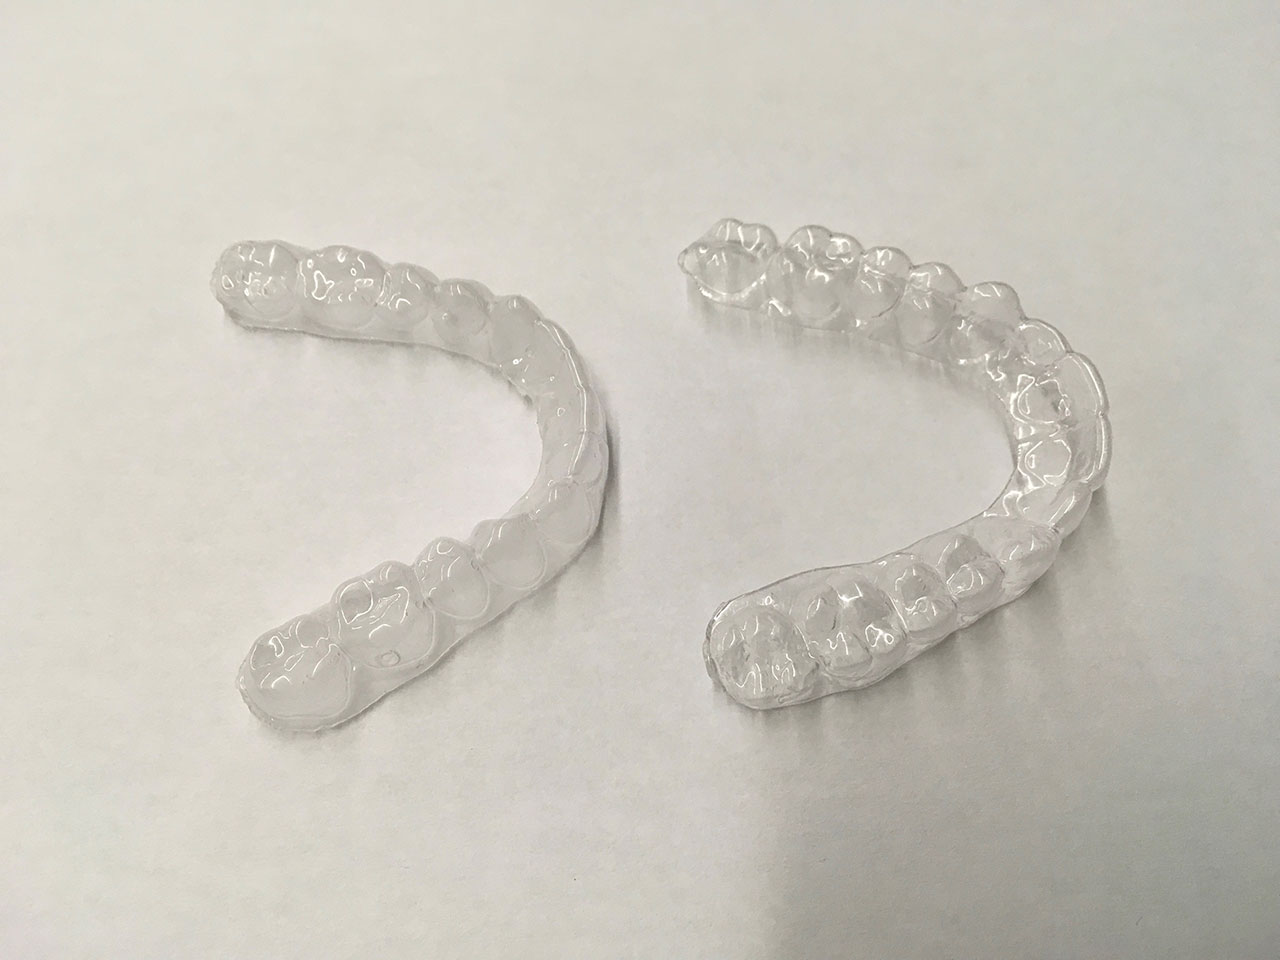 Softening Edges on Tooth Aligners